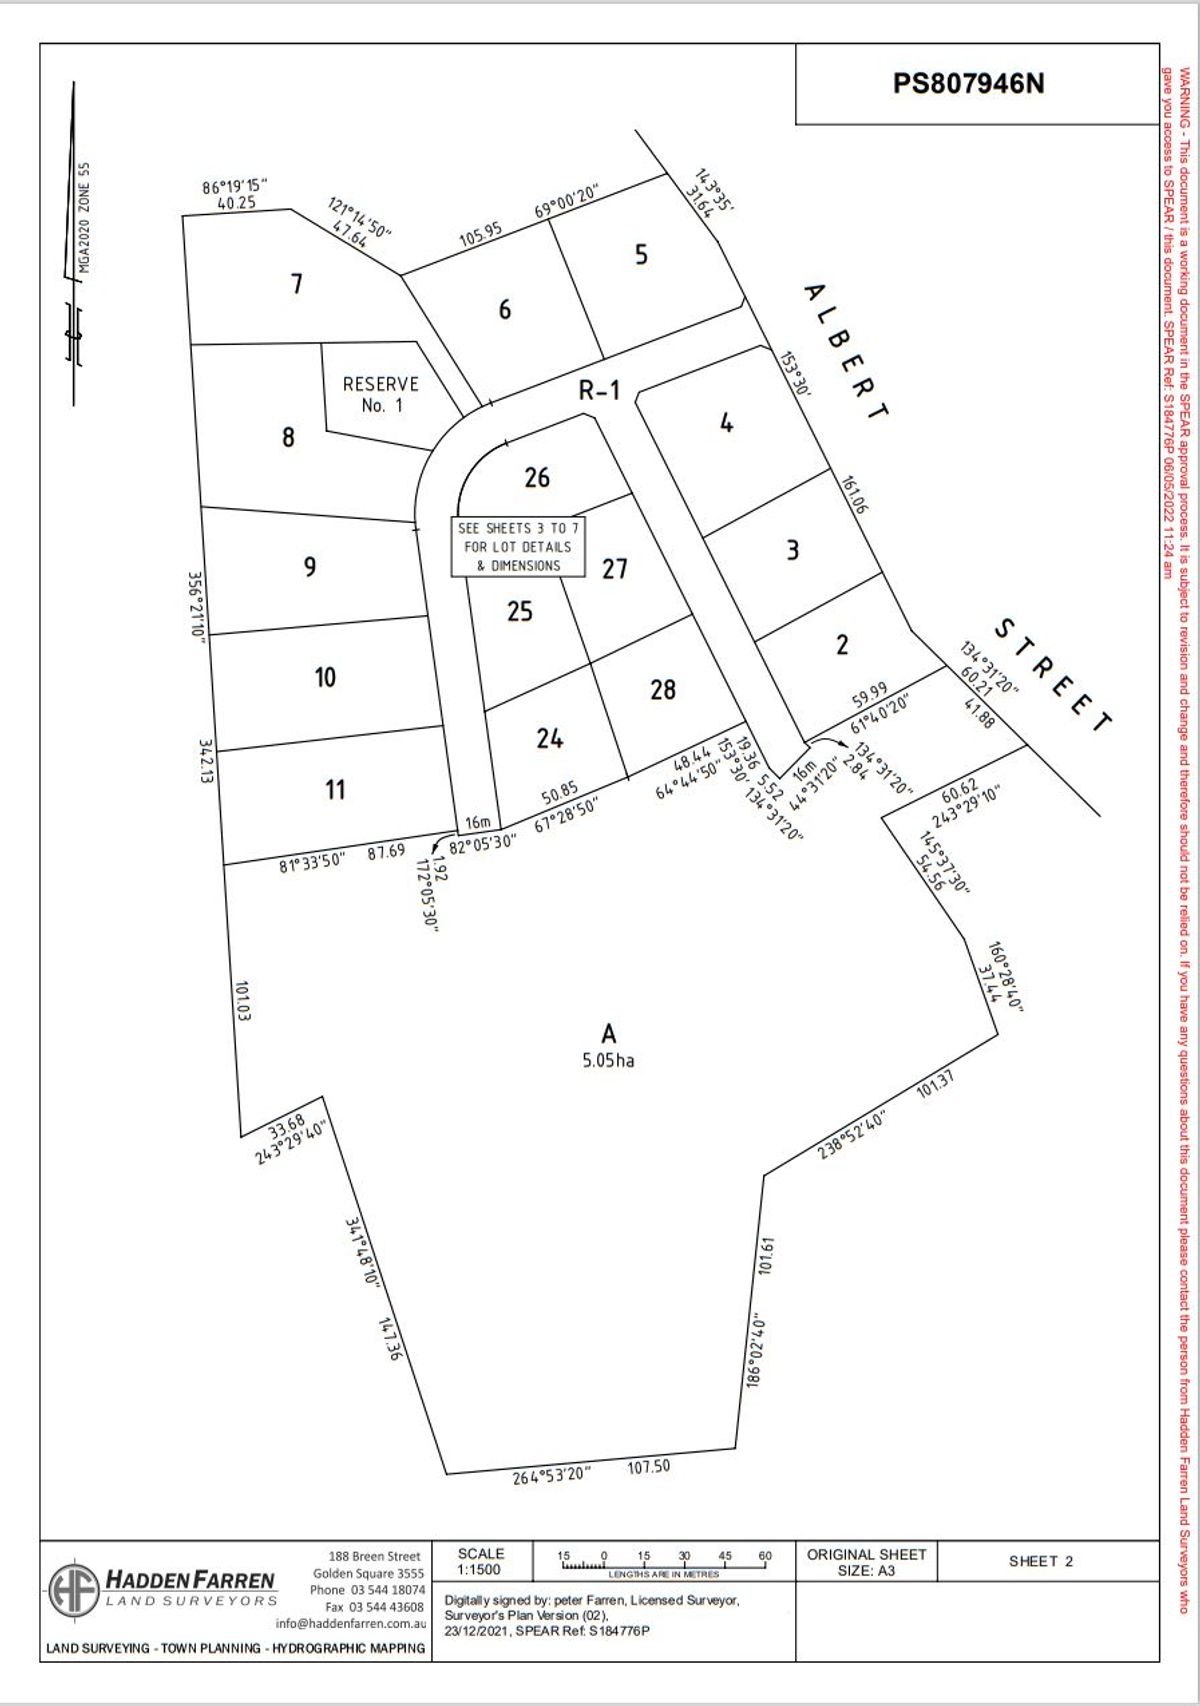 Page 2 Plan of subdivision